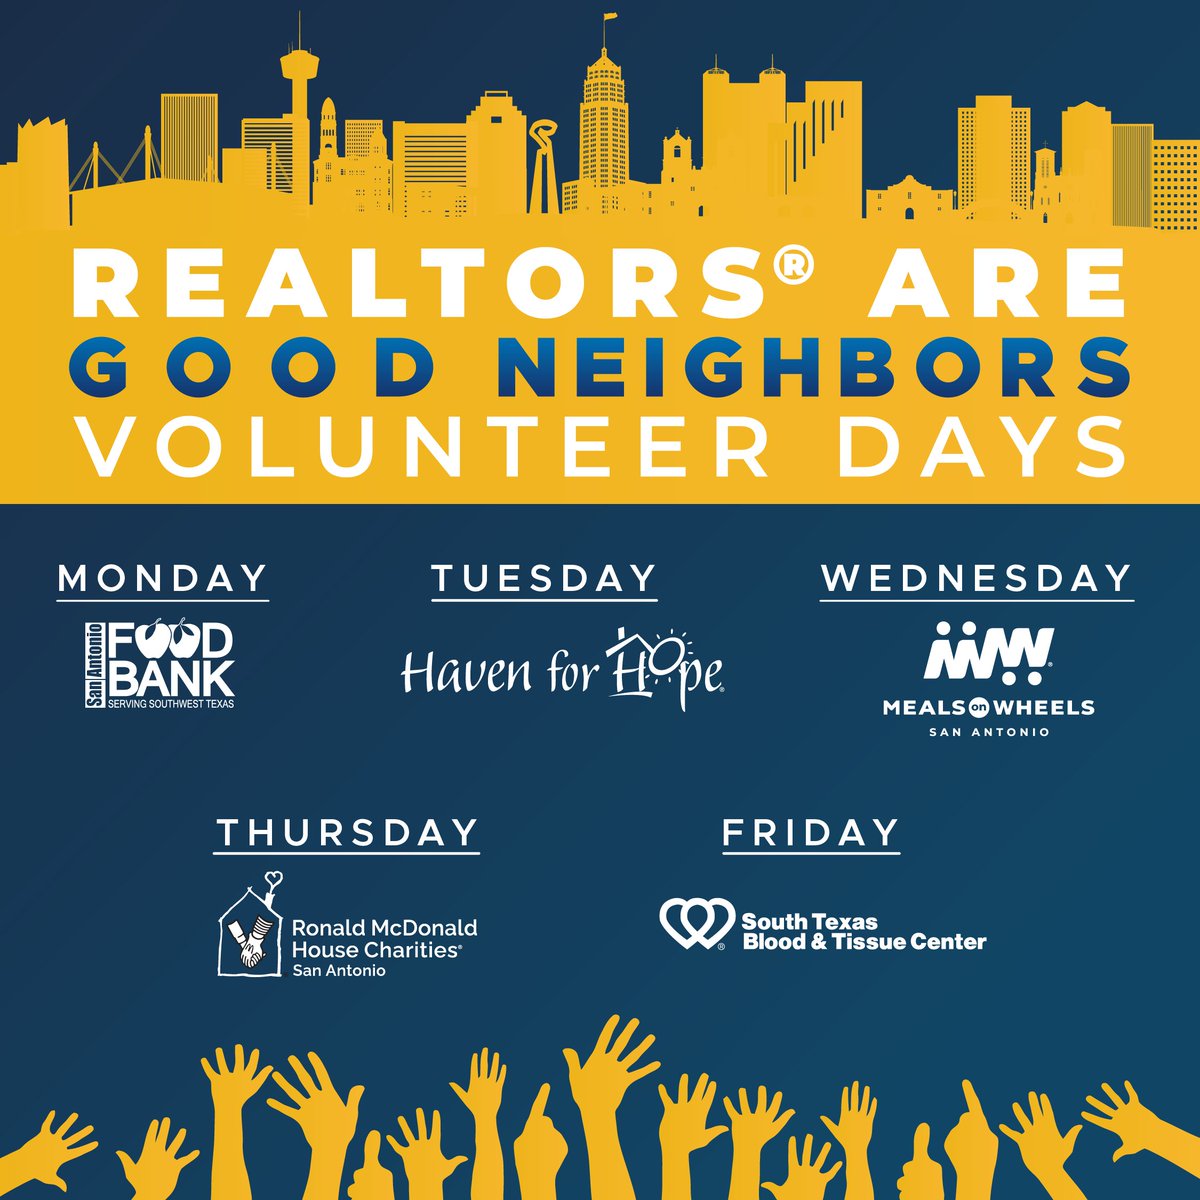 🏡✨ REALTORS® it’s time to make a difference! Join us for 'REALTORS® Are Good Neighbors' from June 3-7.

Sign up now and be part of something great! 💪❤️ 

Link: bit.ly/3Uu4ose

#GoodNeighbors #CommunityFirst #RealtorsCare #JoinUs